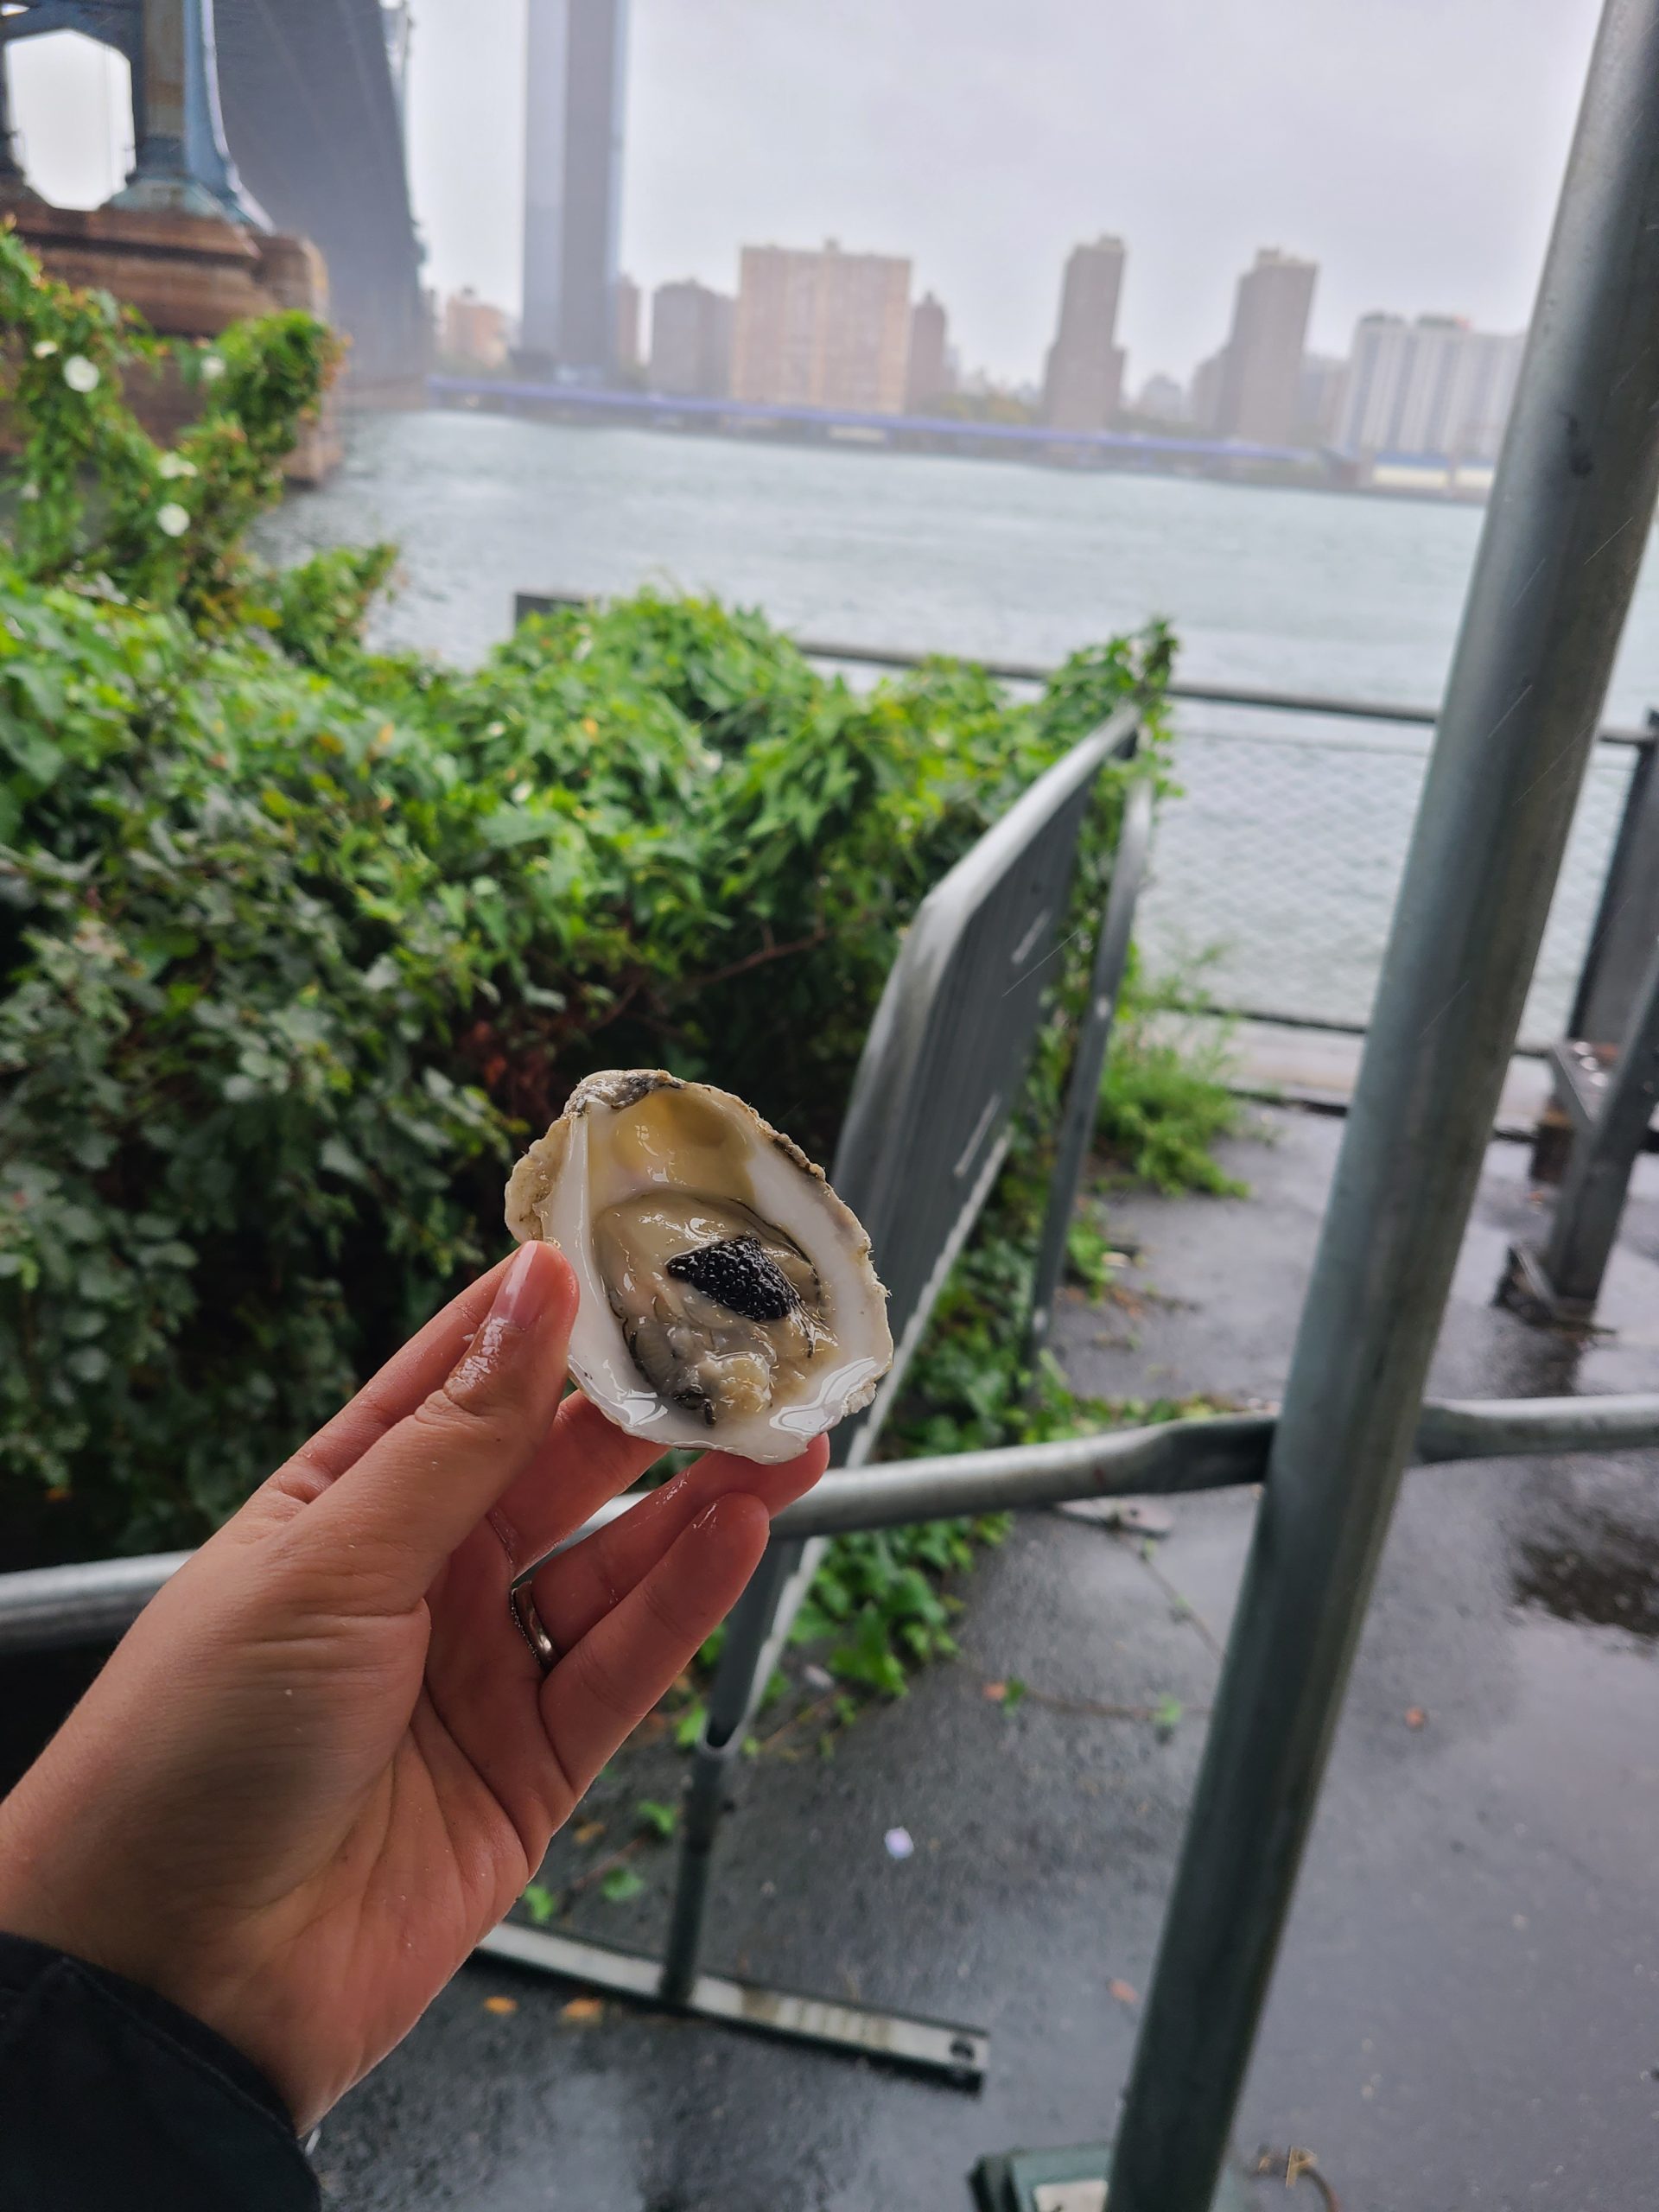 A woman holds up an oyster against the back drop of New York